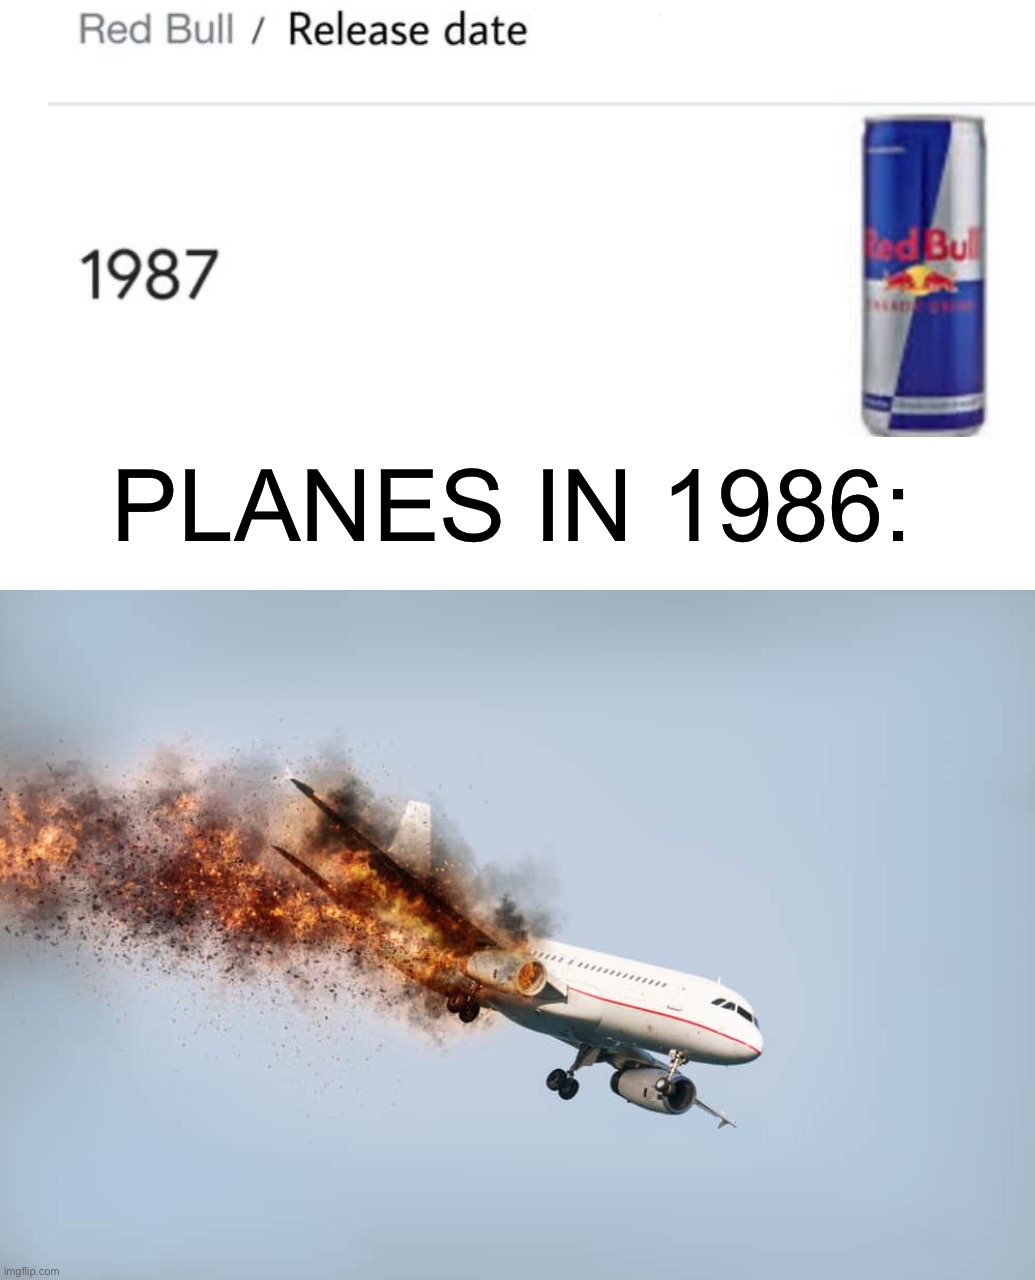 *dies of death* | PLANES IN 1986: | image tagged in memes,funny,plane,red bull,uh oh,oh no | made w/ Imgflip meme maker